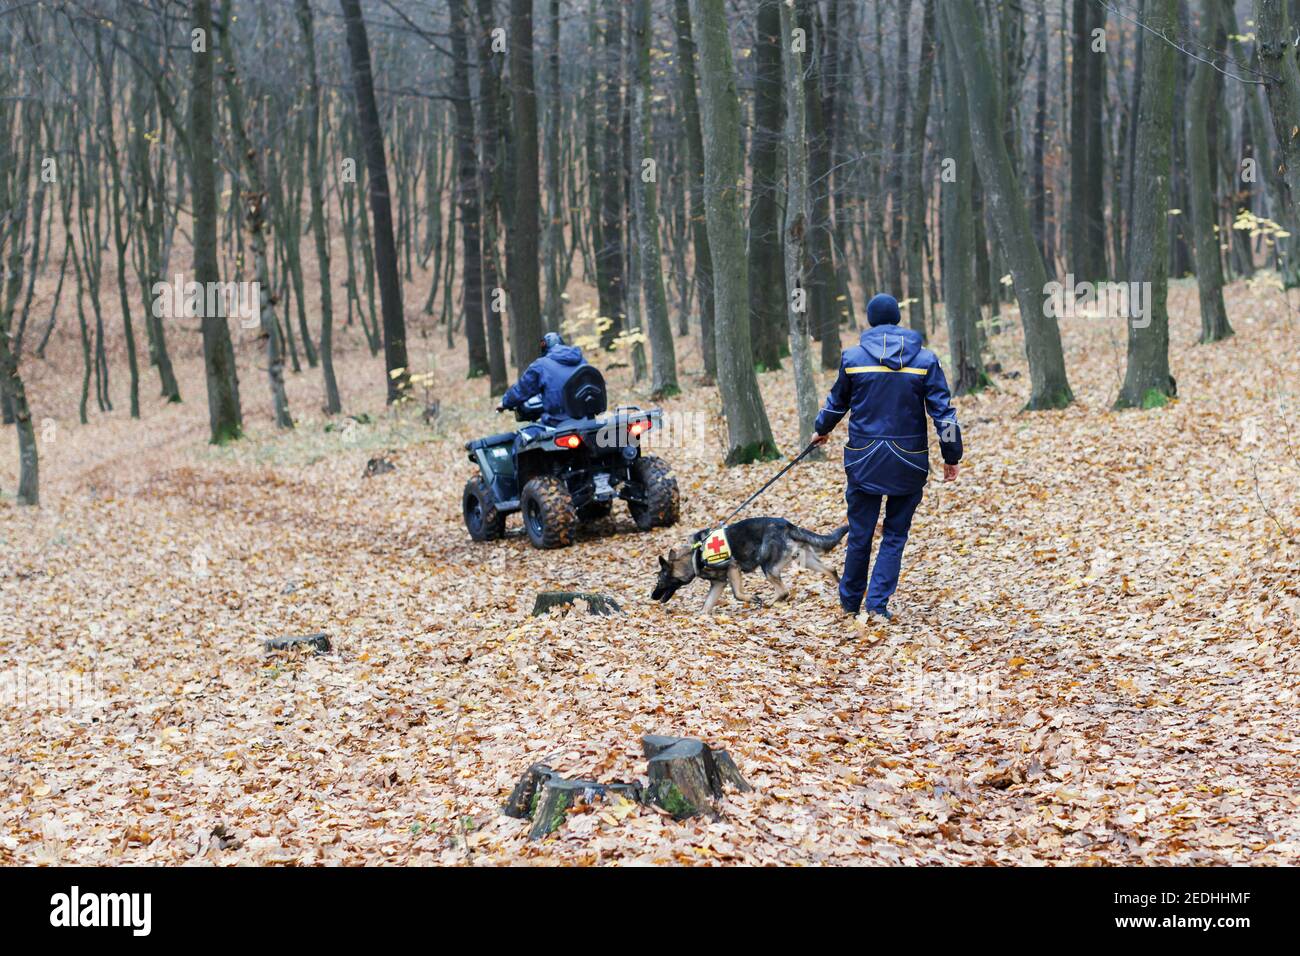 A rescuer with a dog on a leash searches in the woods, a rescuer on an ATV also searches. Search for a man in the woods Stock Photo